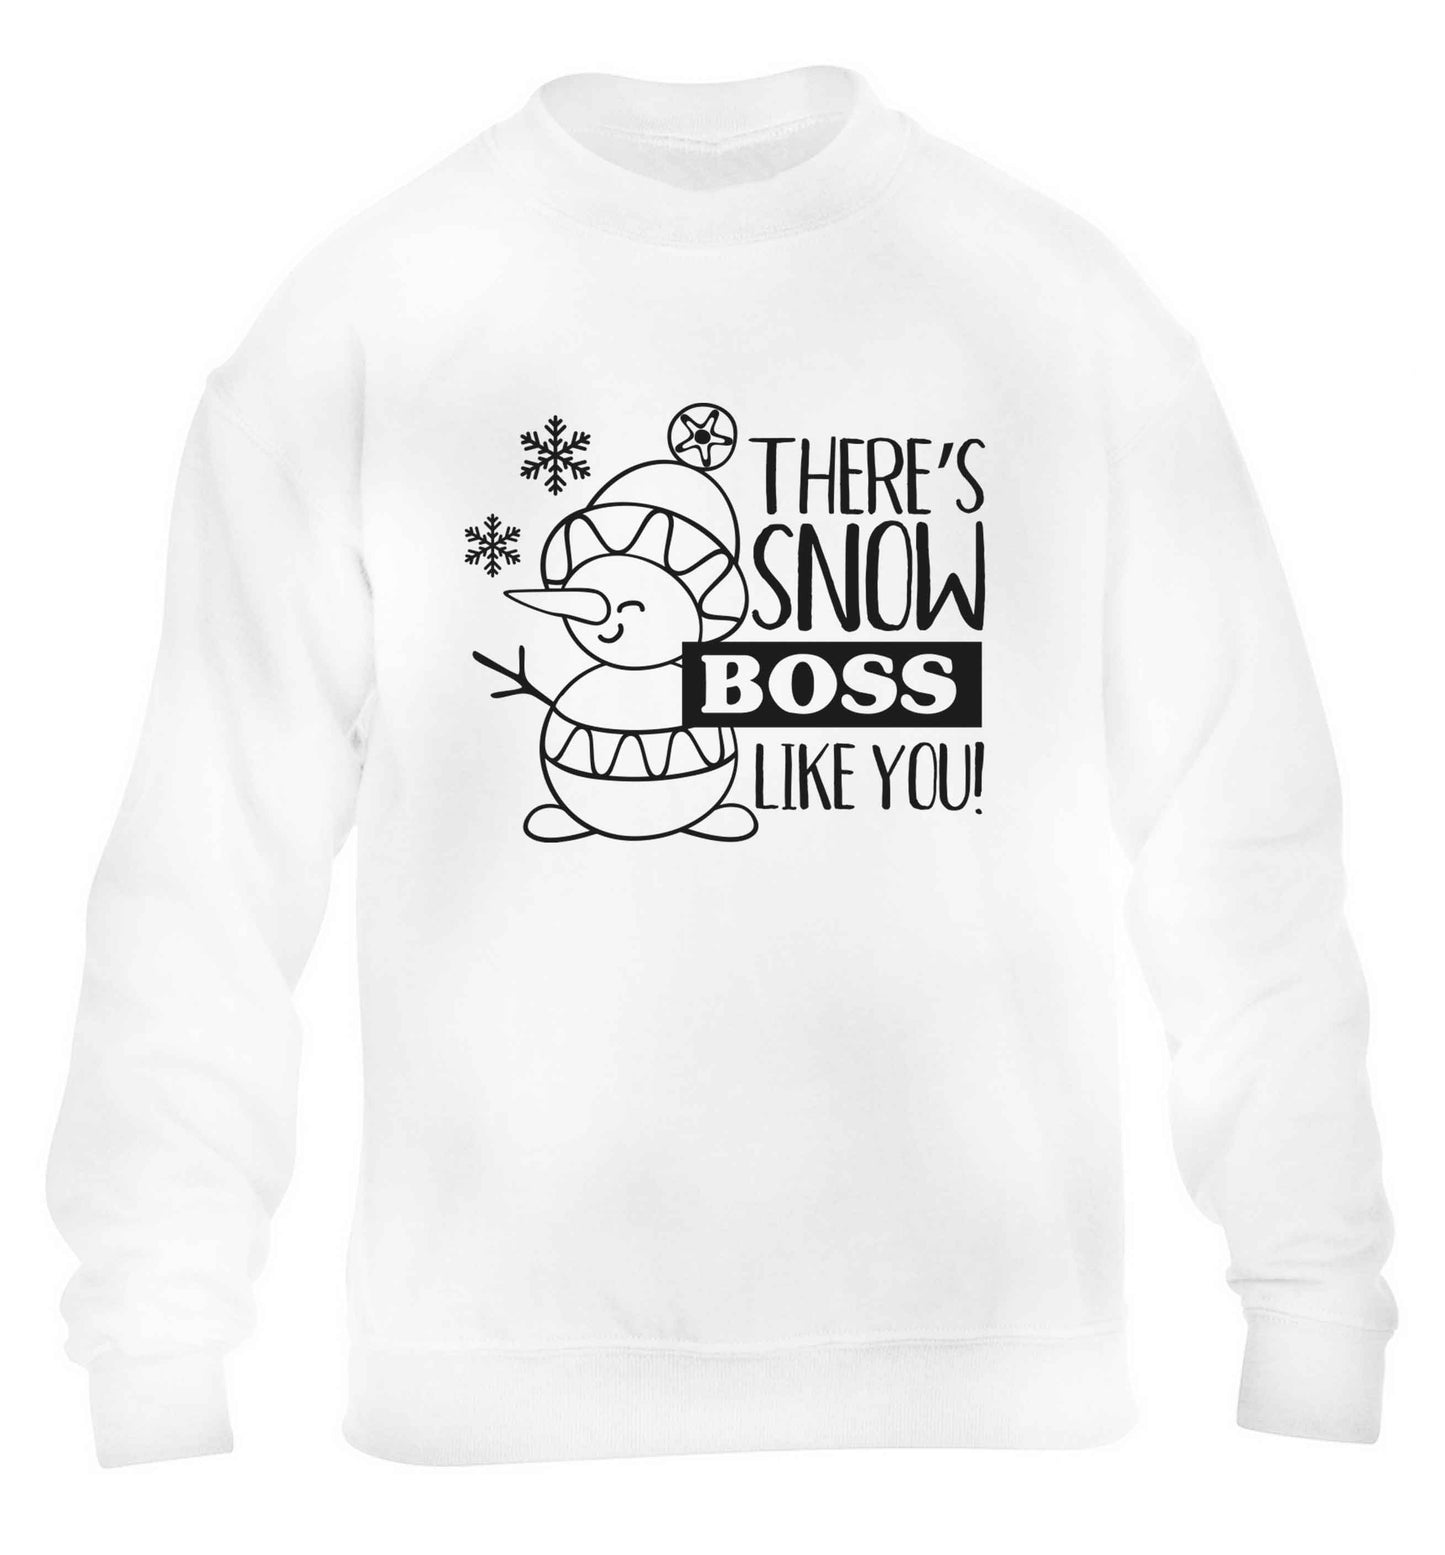 There's snow boss like you children's white sweater 12-13 Years